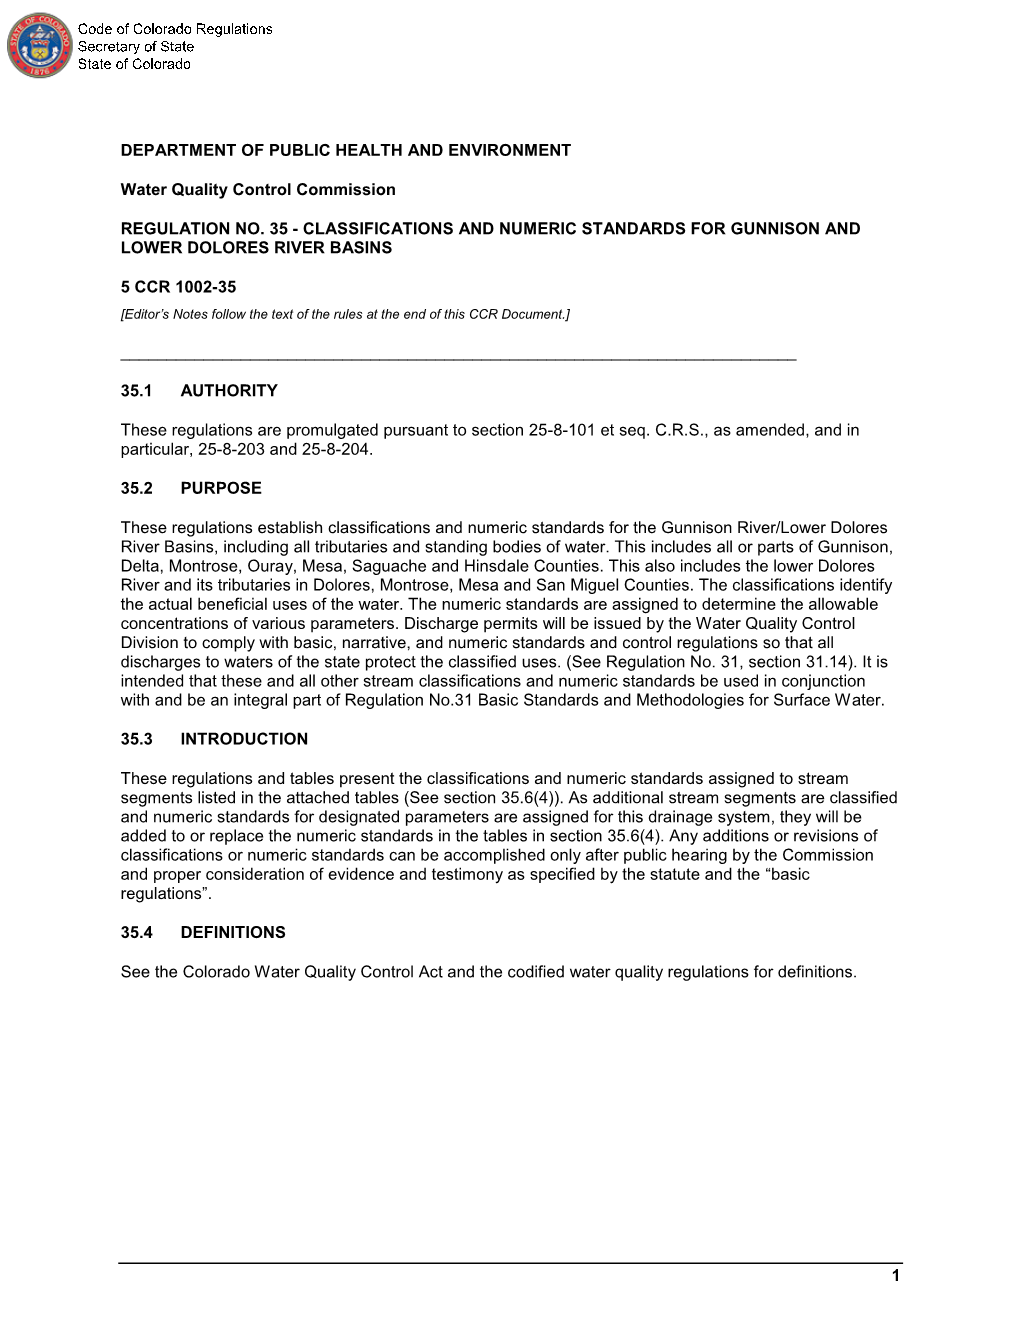 CODE of COLORADO REGULATIONS 5 CCR 1002-35 Water Quality Control Commission